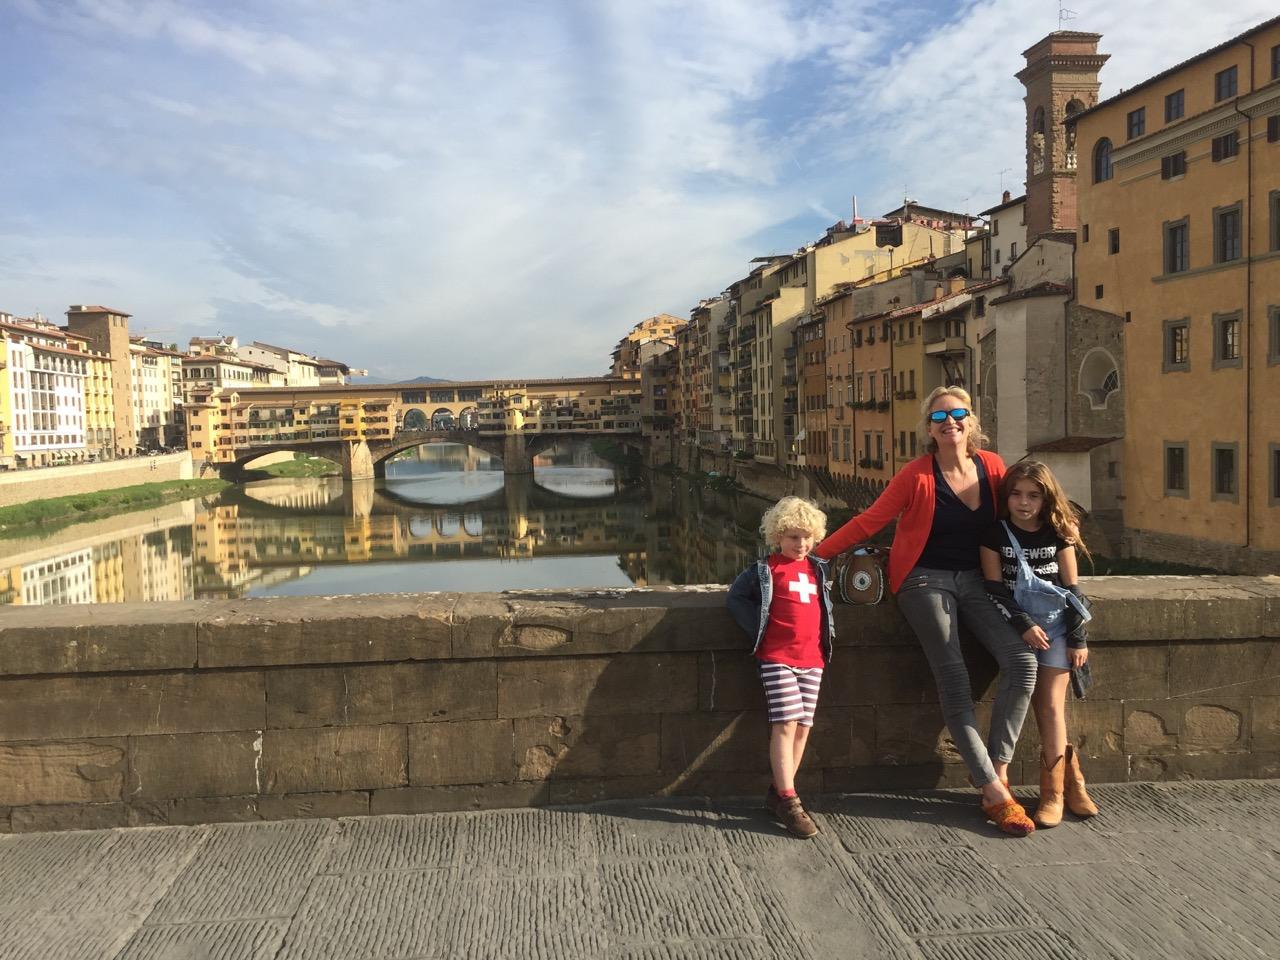 Imogen and her family on the Ponte Vecchio